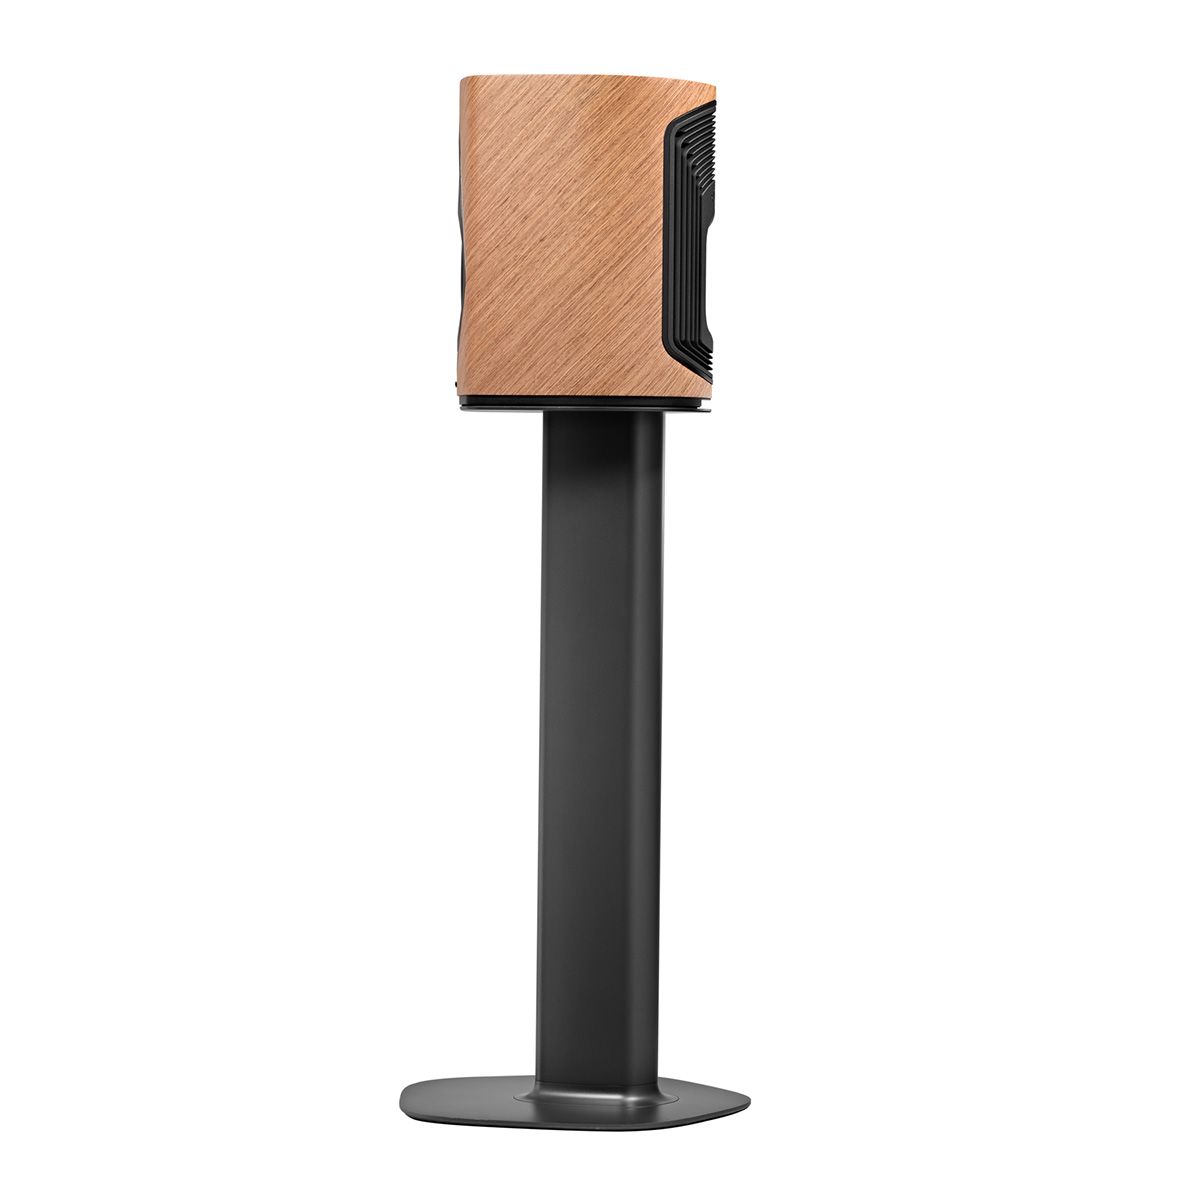 Sonus Faber Duetto Wireless Speaker System side view on stand